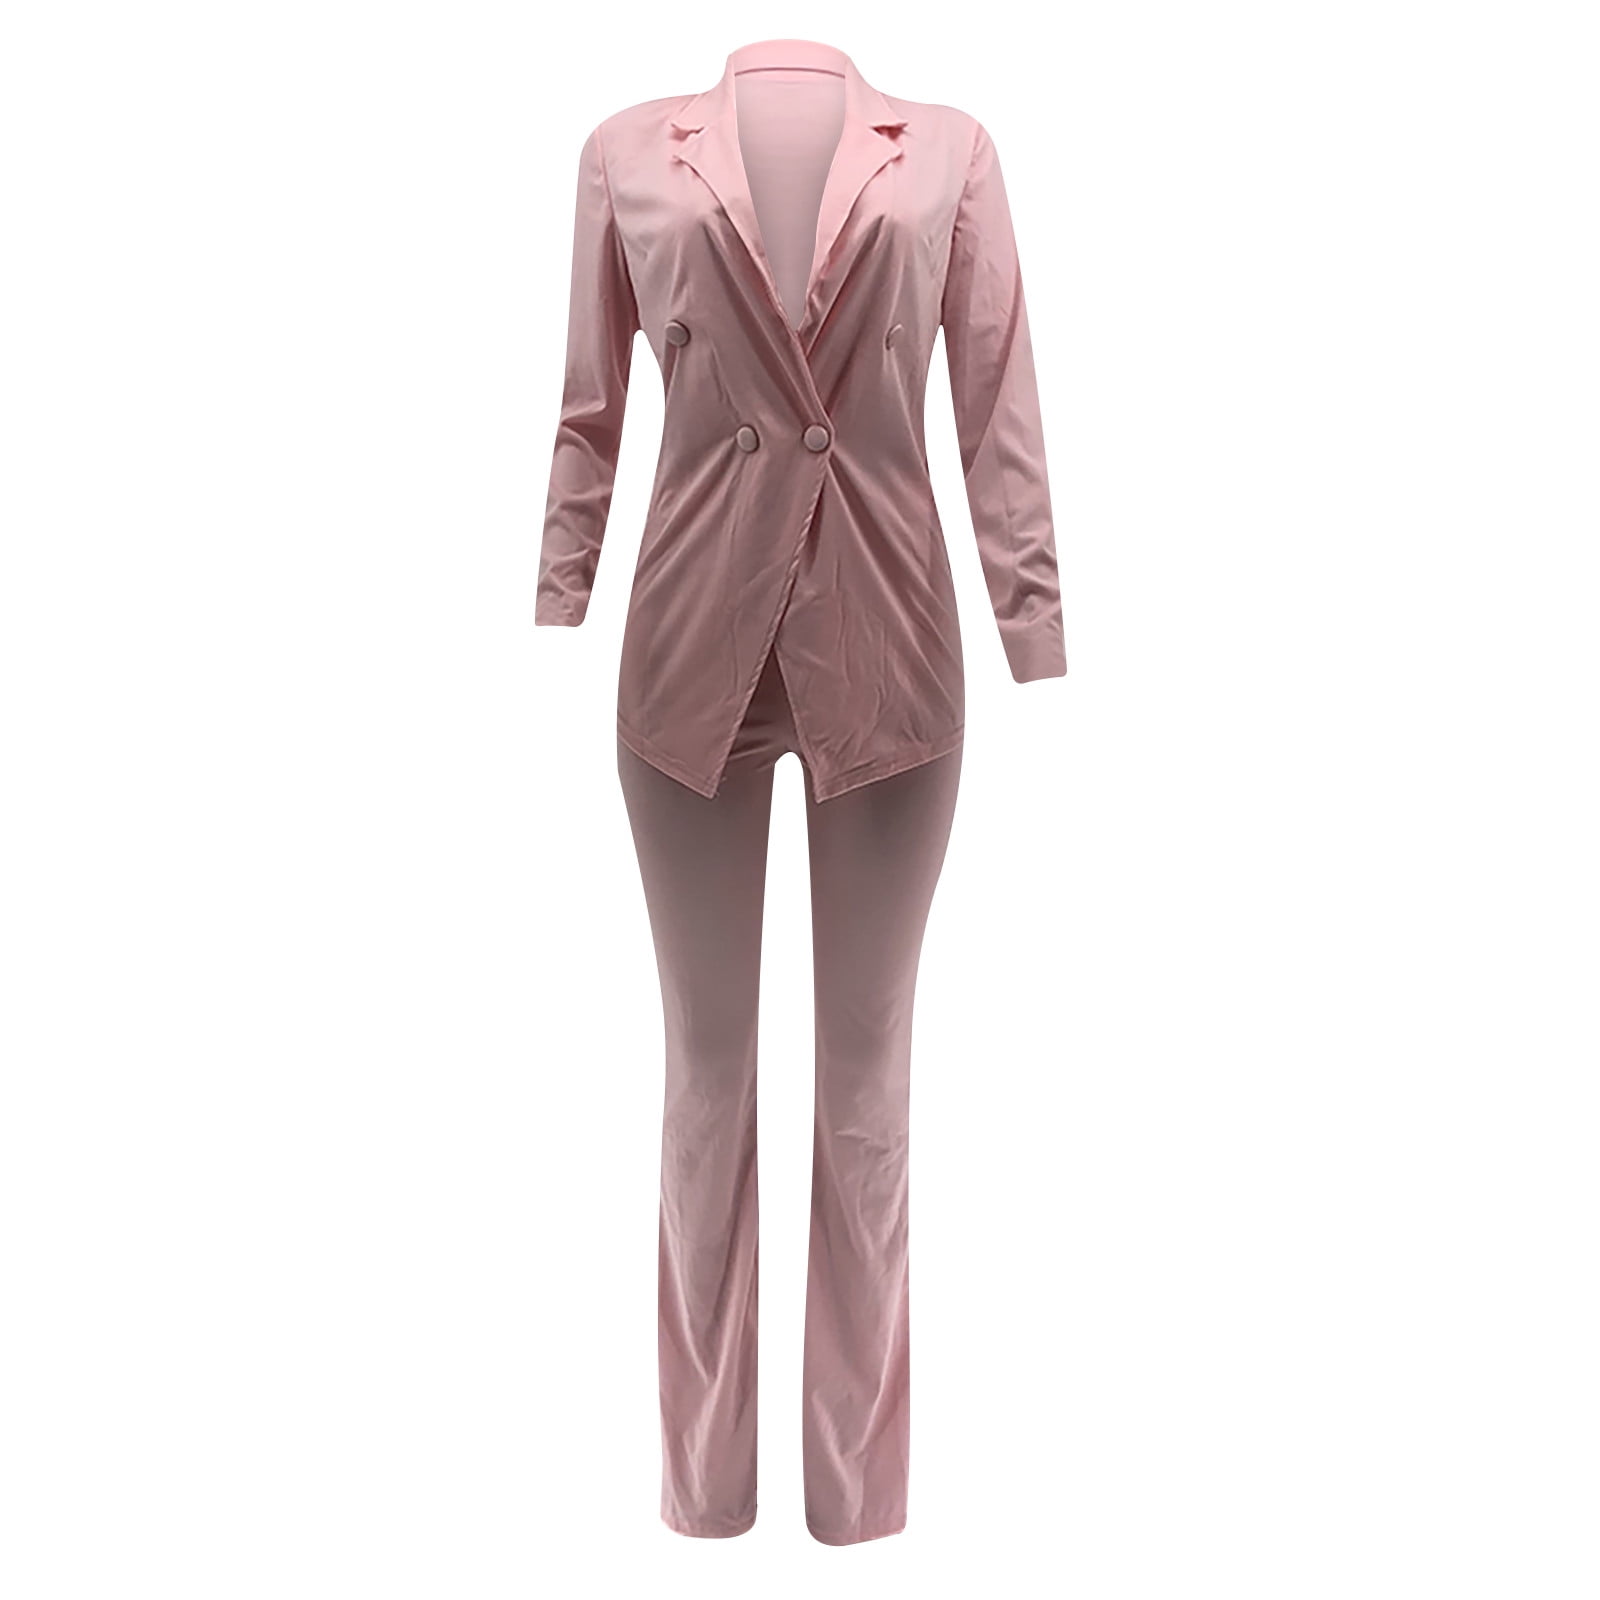  Plus Size Casual Business Suits for Curvy Women Suits Women  Casual Suits for Women Suitsy Casual with Blingsuits for Women Evening  Party Women Suits Set Sexywomen's Suits for Casual WearCheap Black-a 